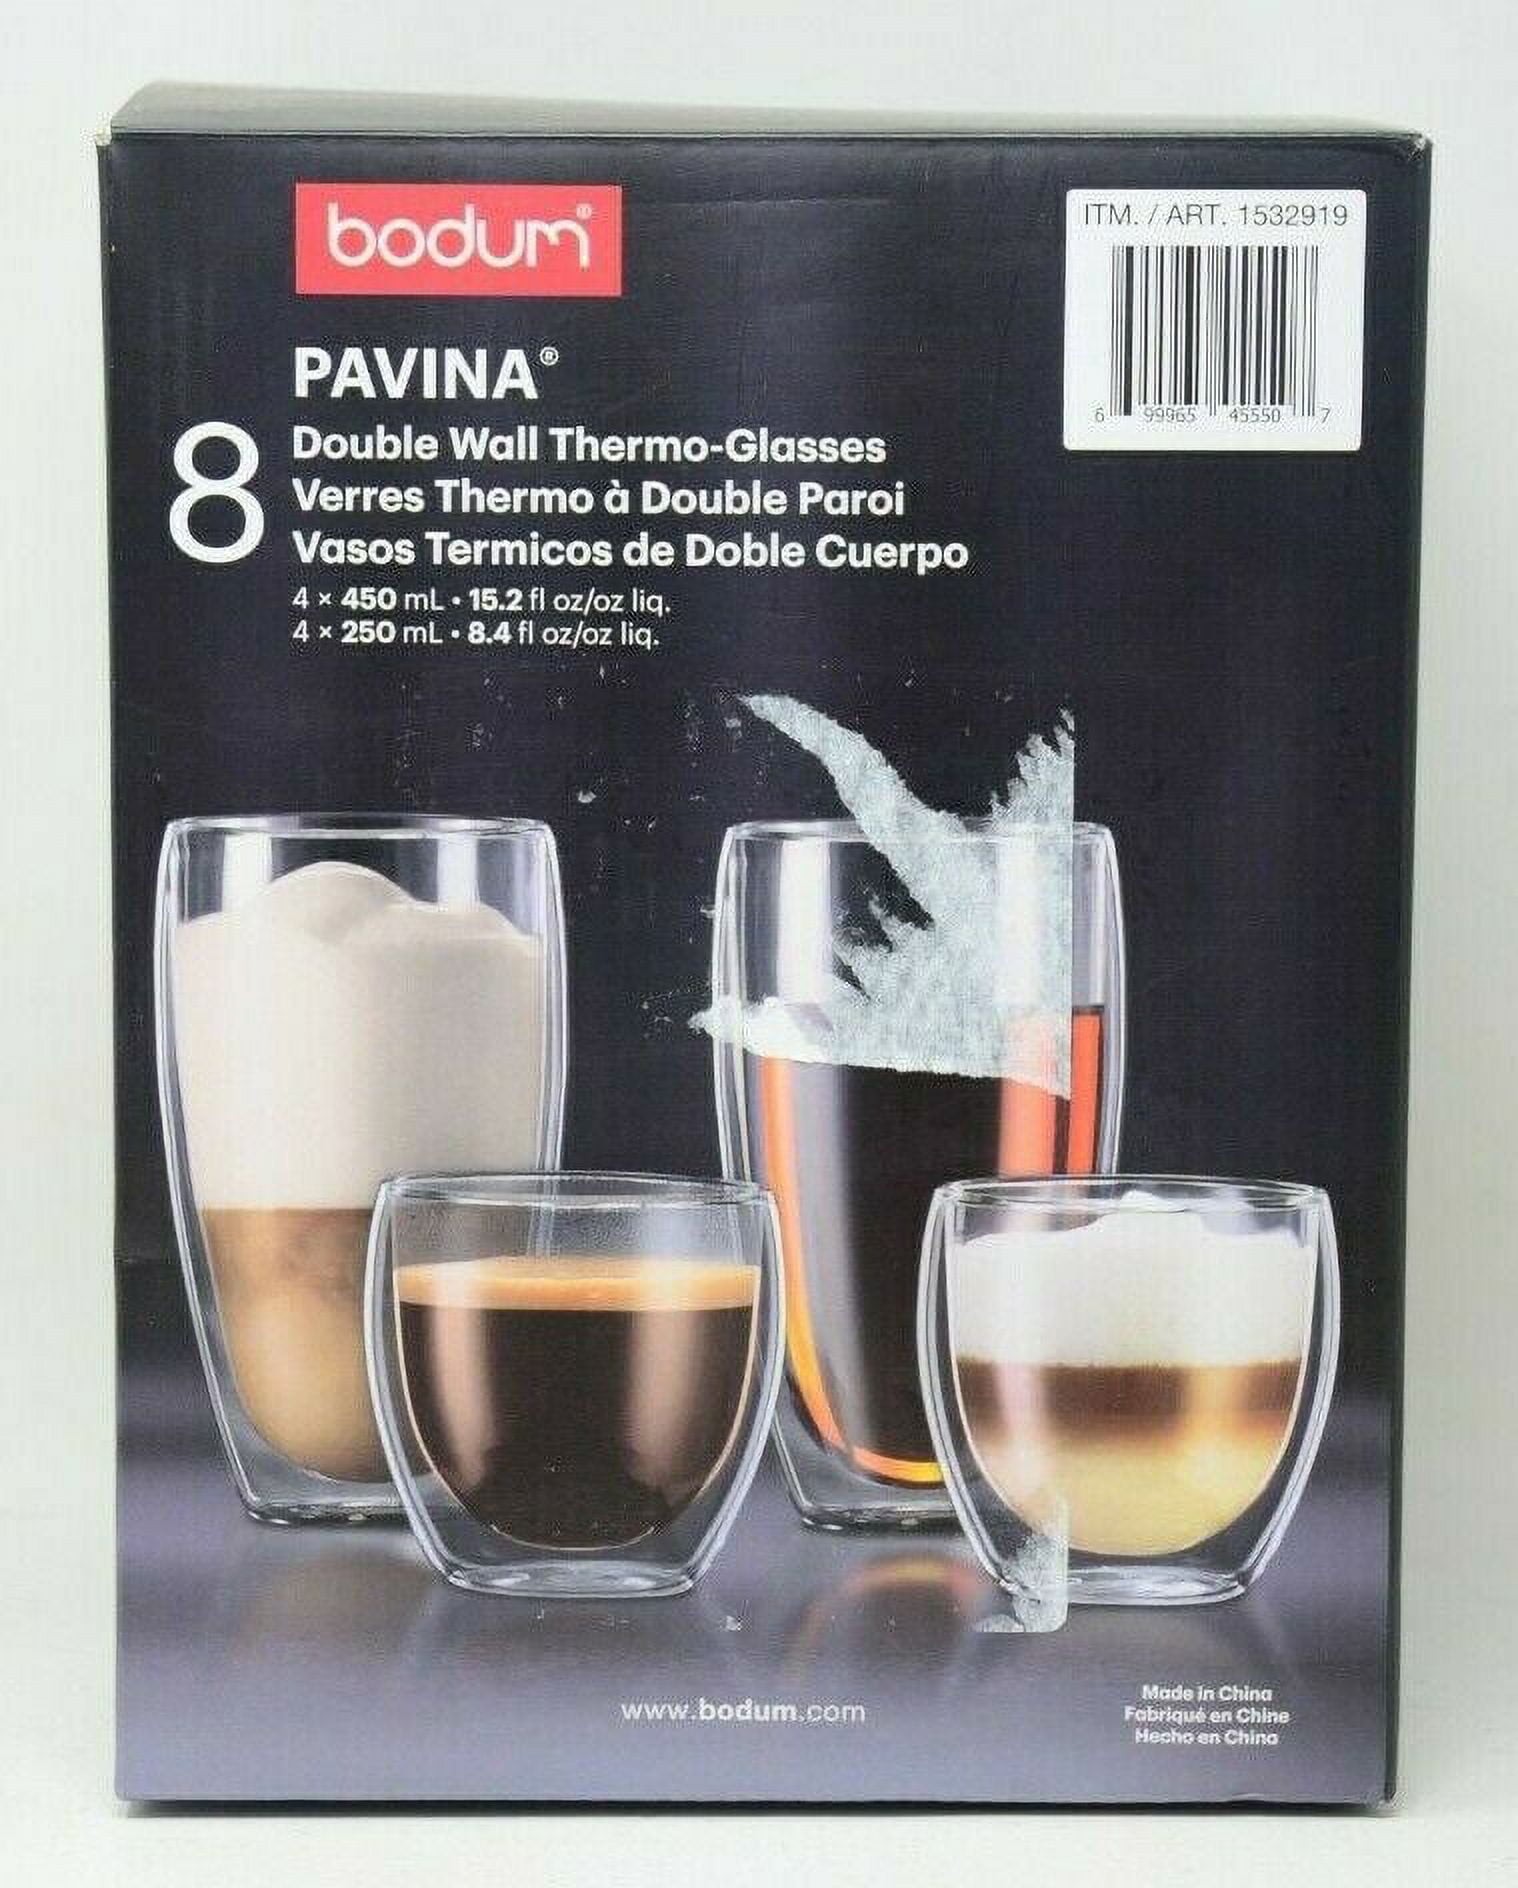 Bodum Thermo-glass Pavina Double Wall Thermo-Glasses - Set of 2